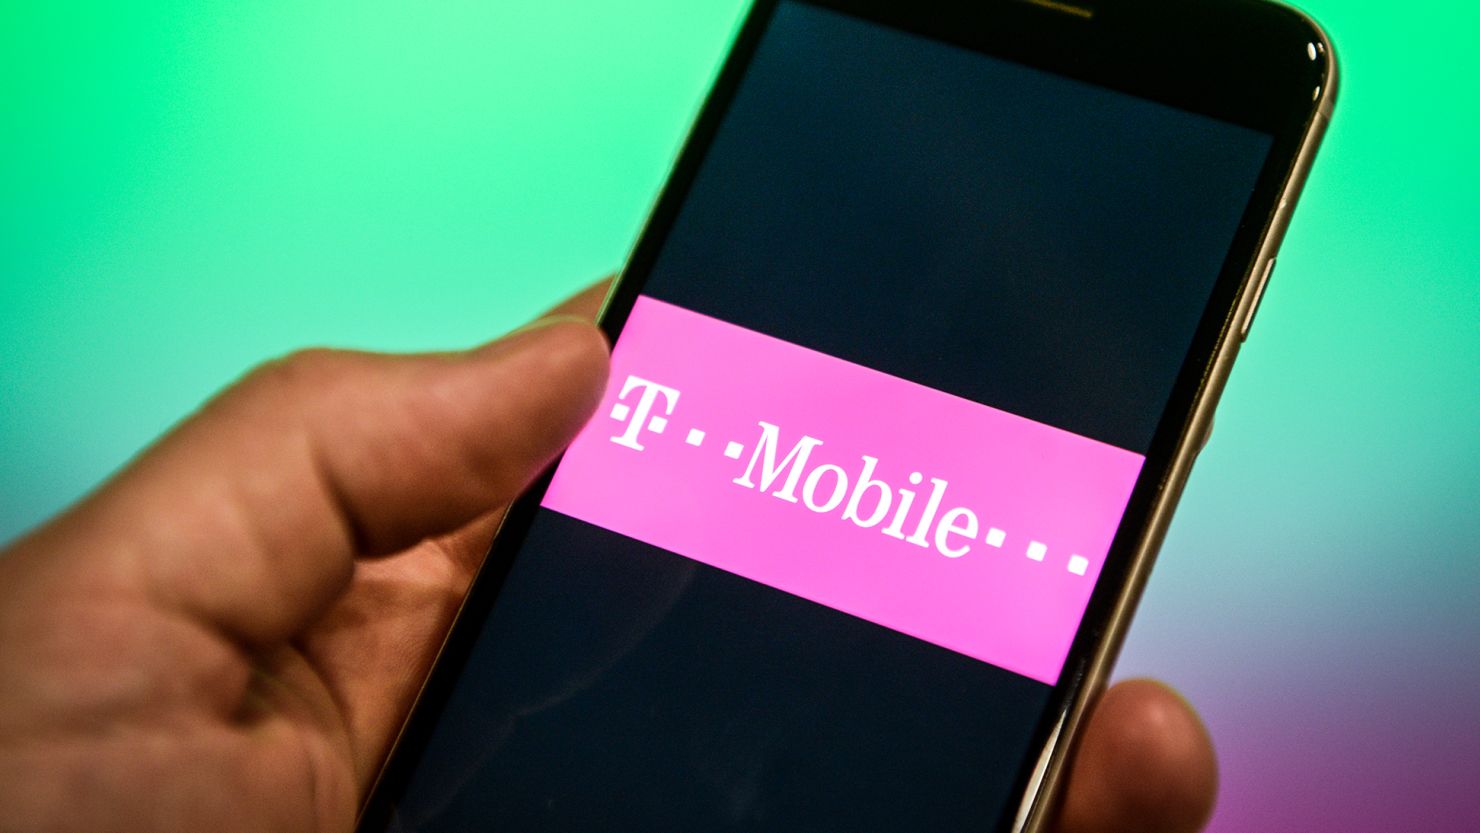 A T-Mobile logo is seen on a smartphone screen in this photo illustration on July 5, 2018.